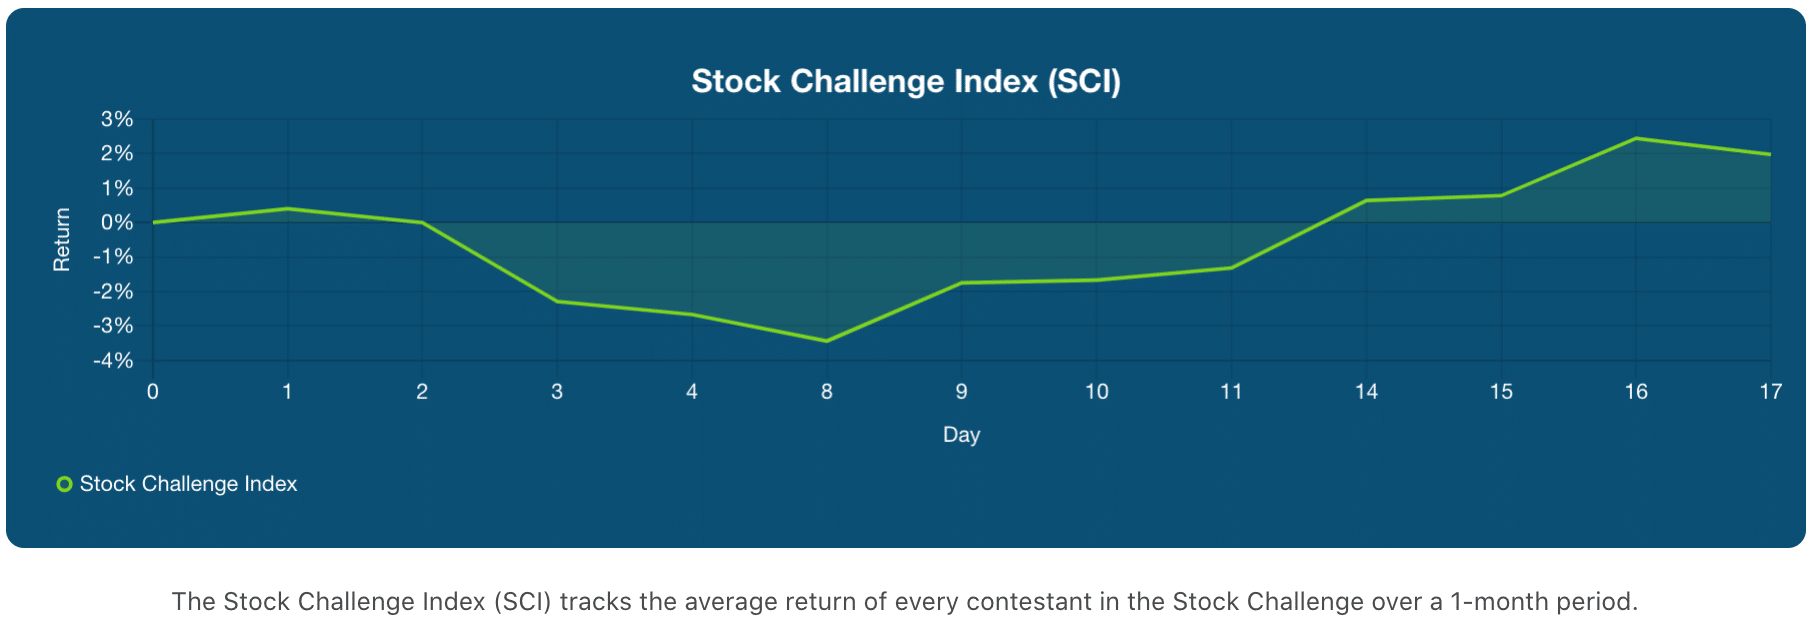 Stock Challenge Index (SCI) for Week 2 of the September 2020 Stock Challenge